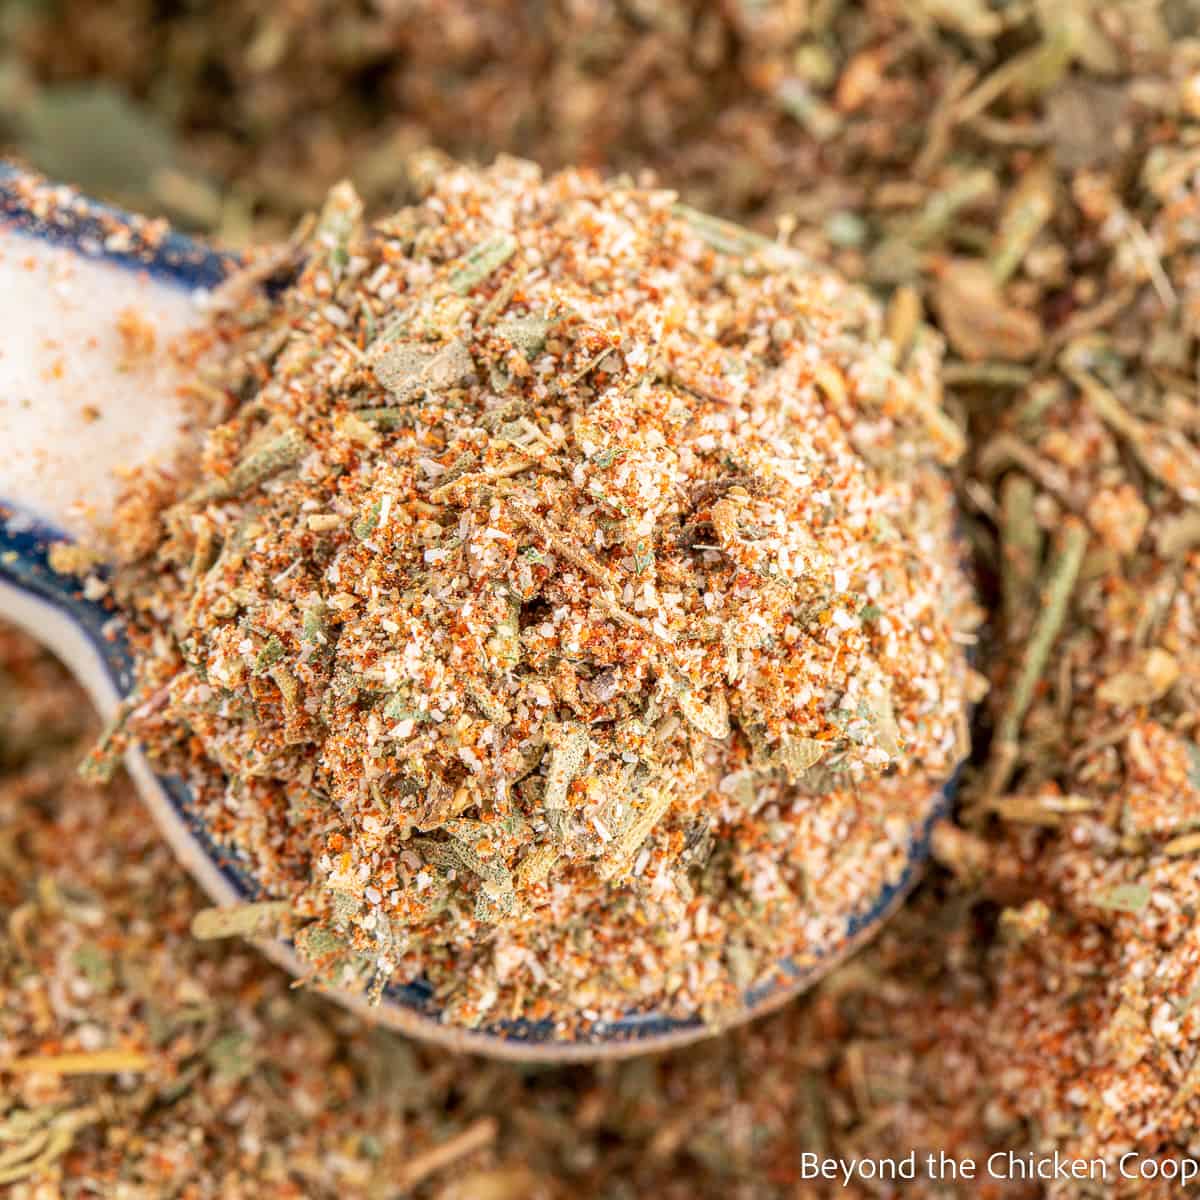 A teaspoon overfilled with a spice blend.